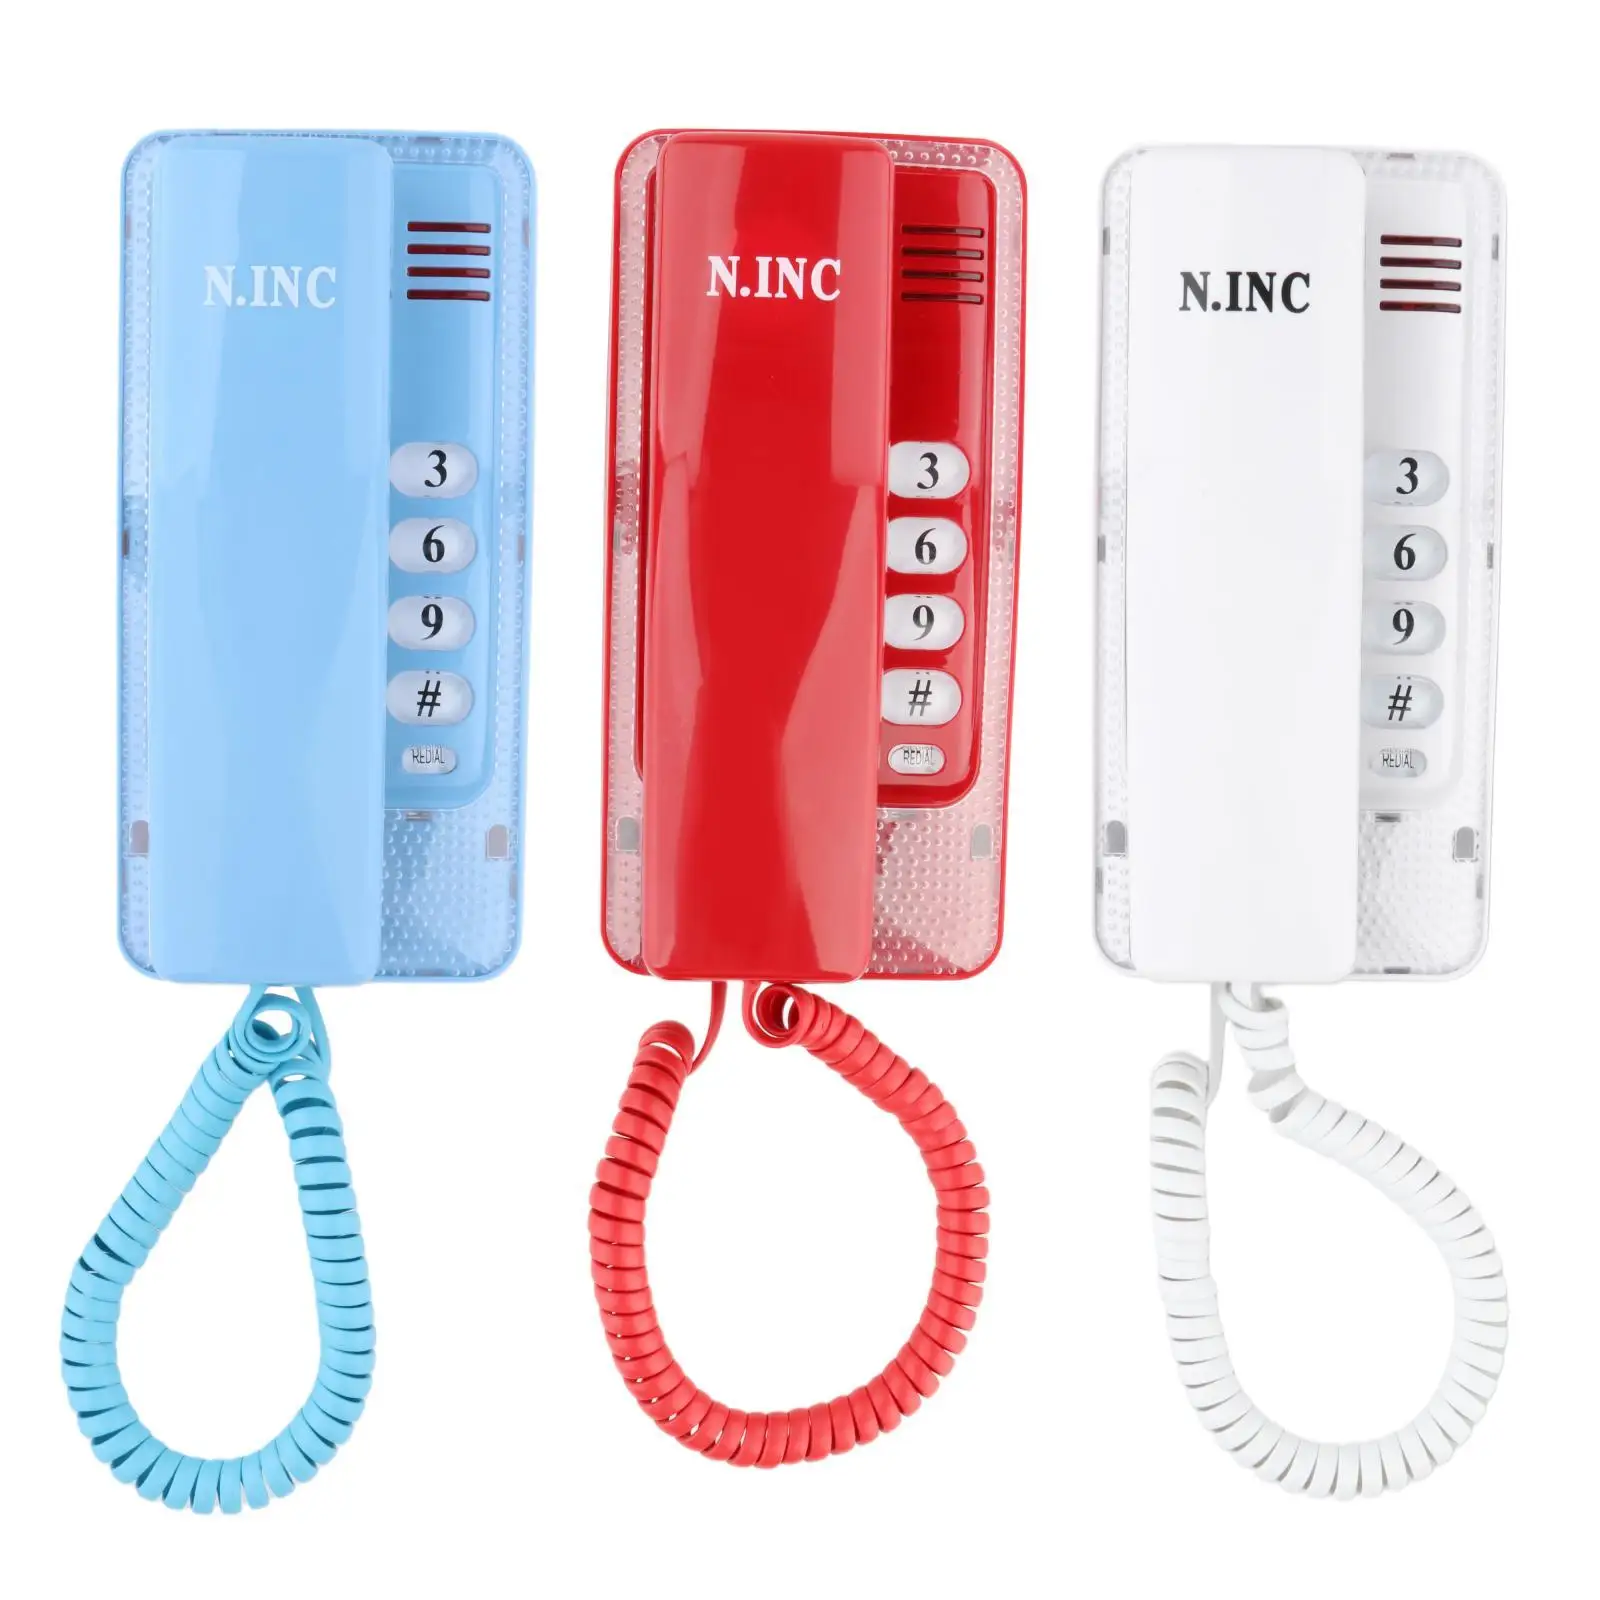 Mini Wall Phone Corded Flash One Key Redial Fashion Powered by Telephone Line Wall Mountable Landline Telephone for Office Hotel